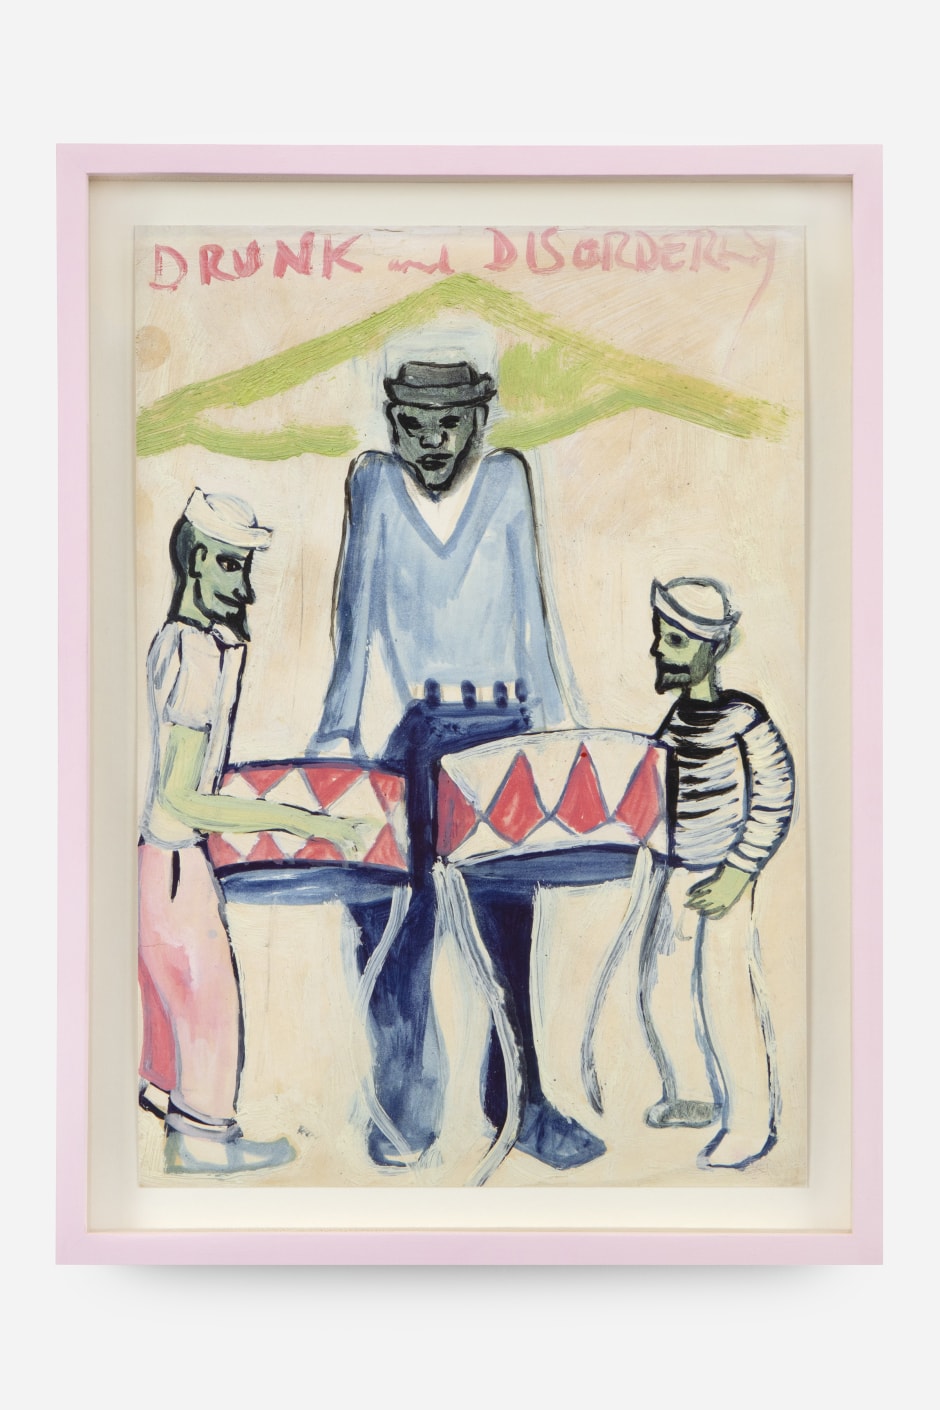 Peter Doig  Drunk and Disorderly  2023Hahnemehle, photorag, 308gsm  42 x 29.7 cm / 16 1⁄2 x 11 5⁄8 in  edition of 50 + 15 a/p  Produced by K2